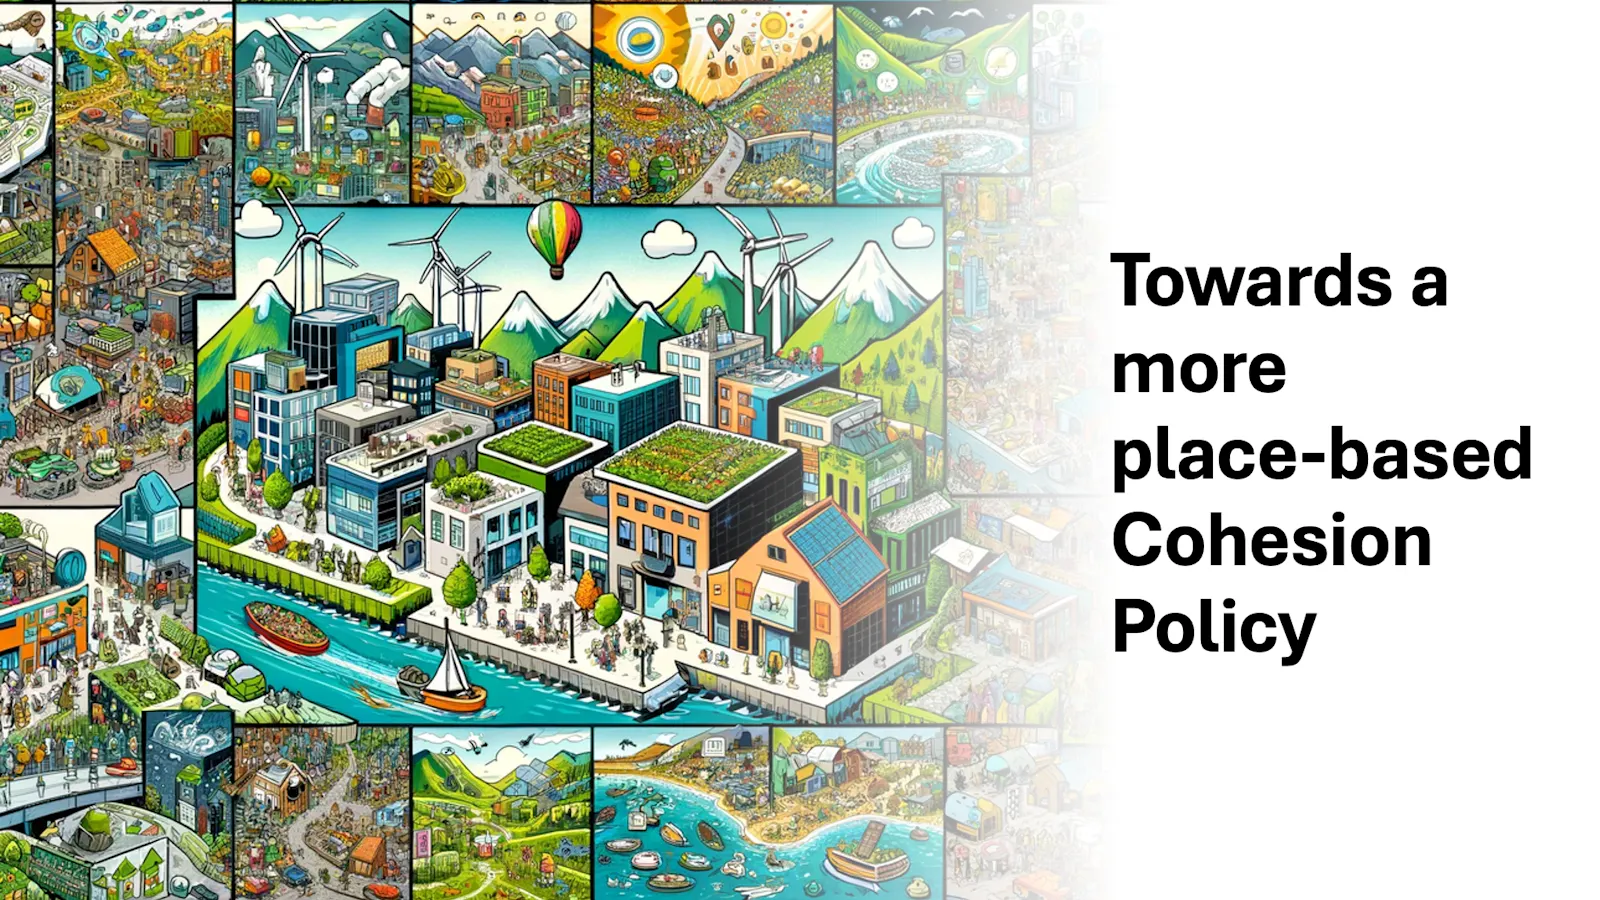 Towards a more place-based Cohesion Policy